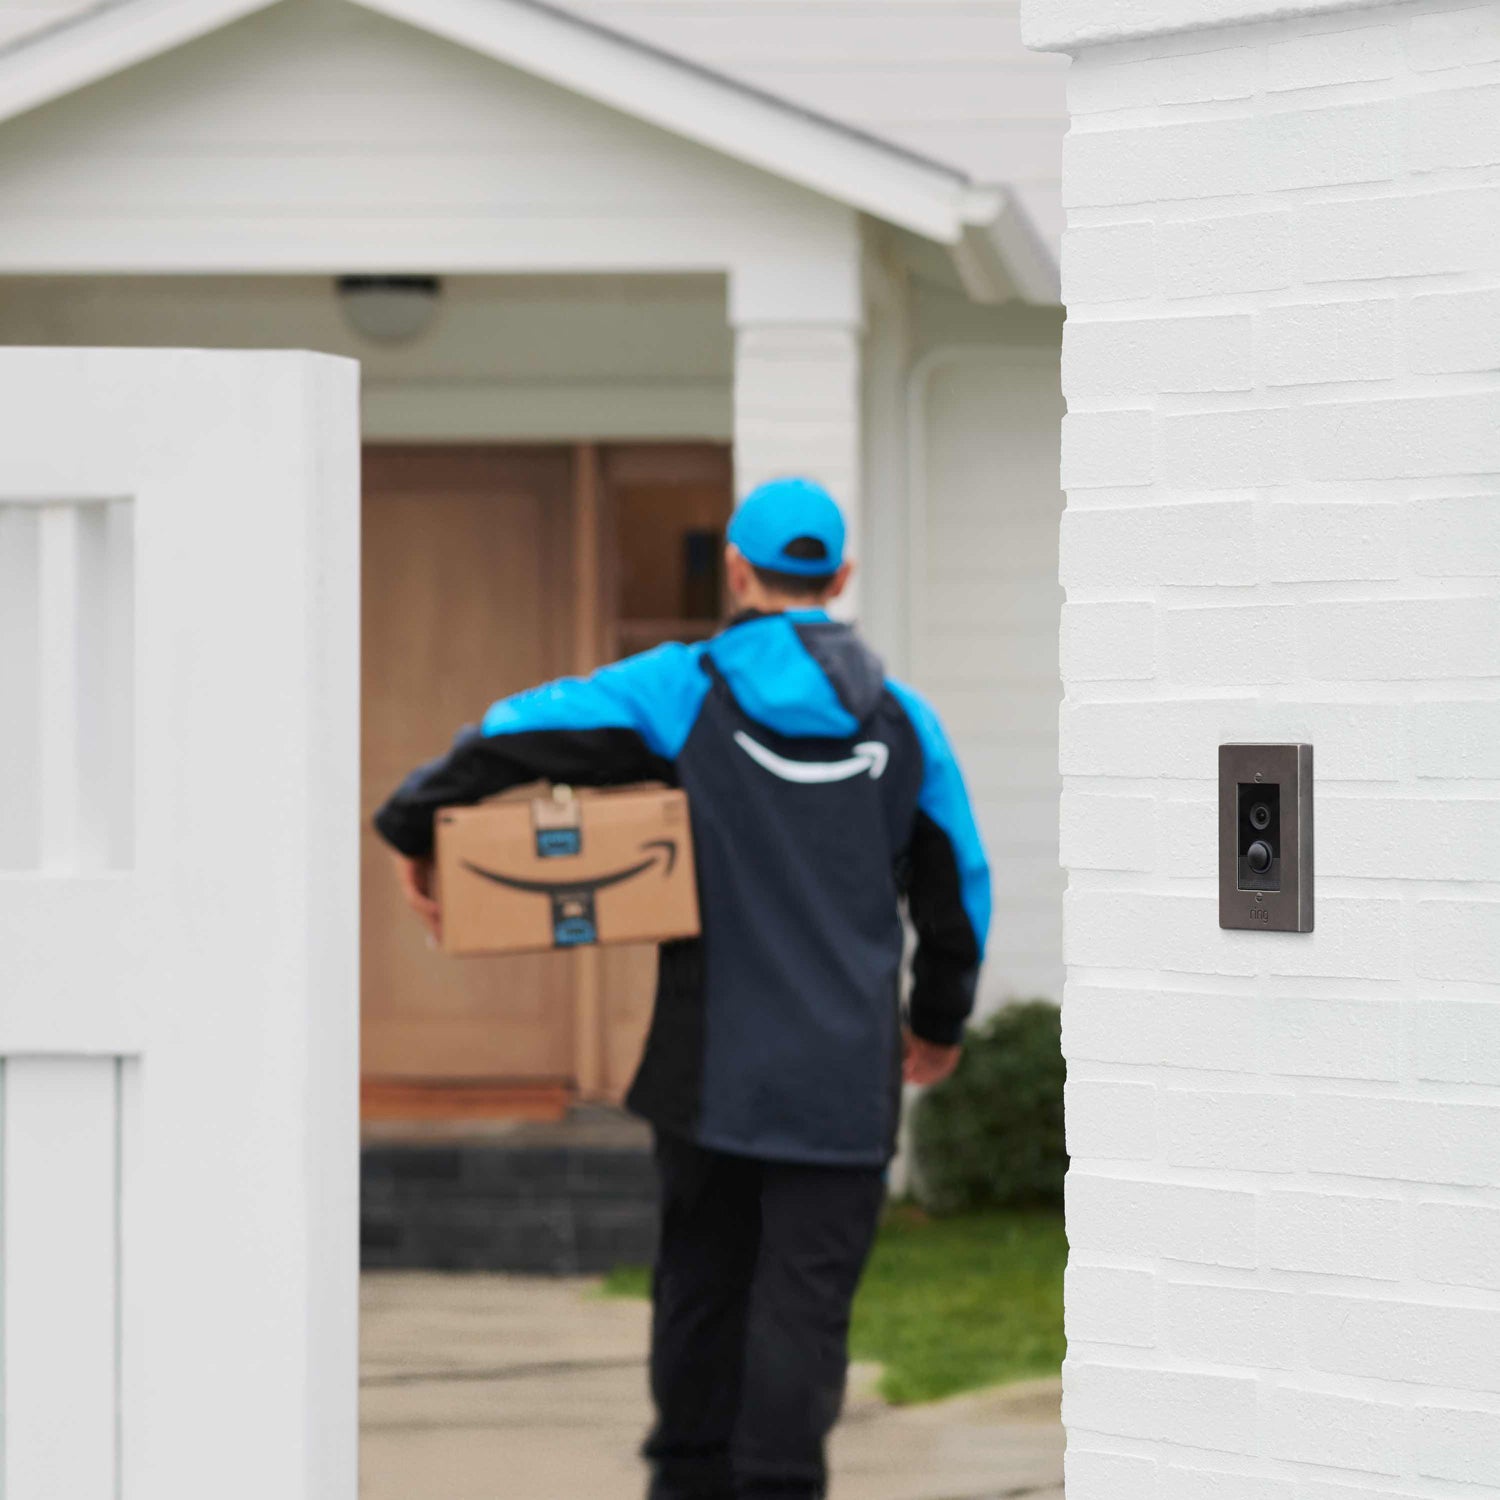 Video Doorbell Elite (Power over Ethernet) - Video Doorbell Elite mounted next to open gate. In the background, an Amazon package deliverer approaches the front door.